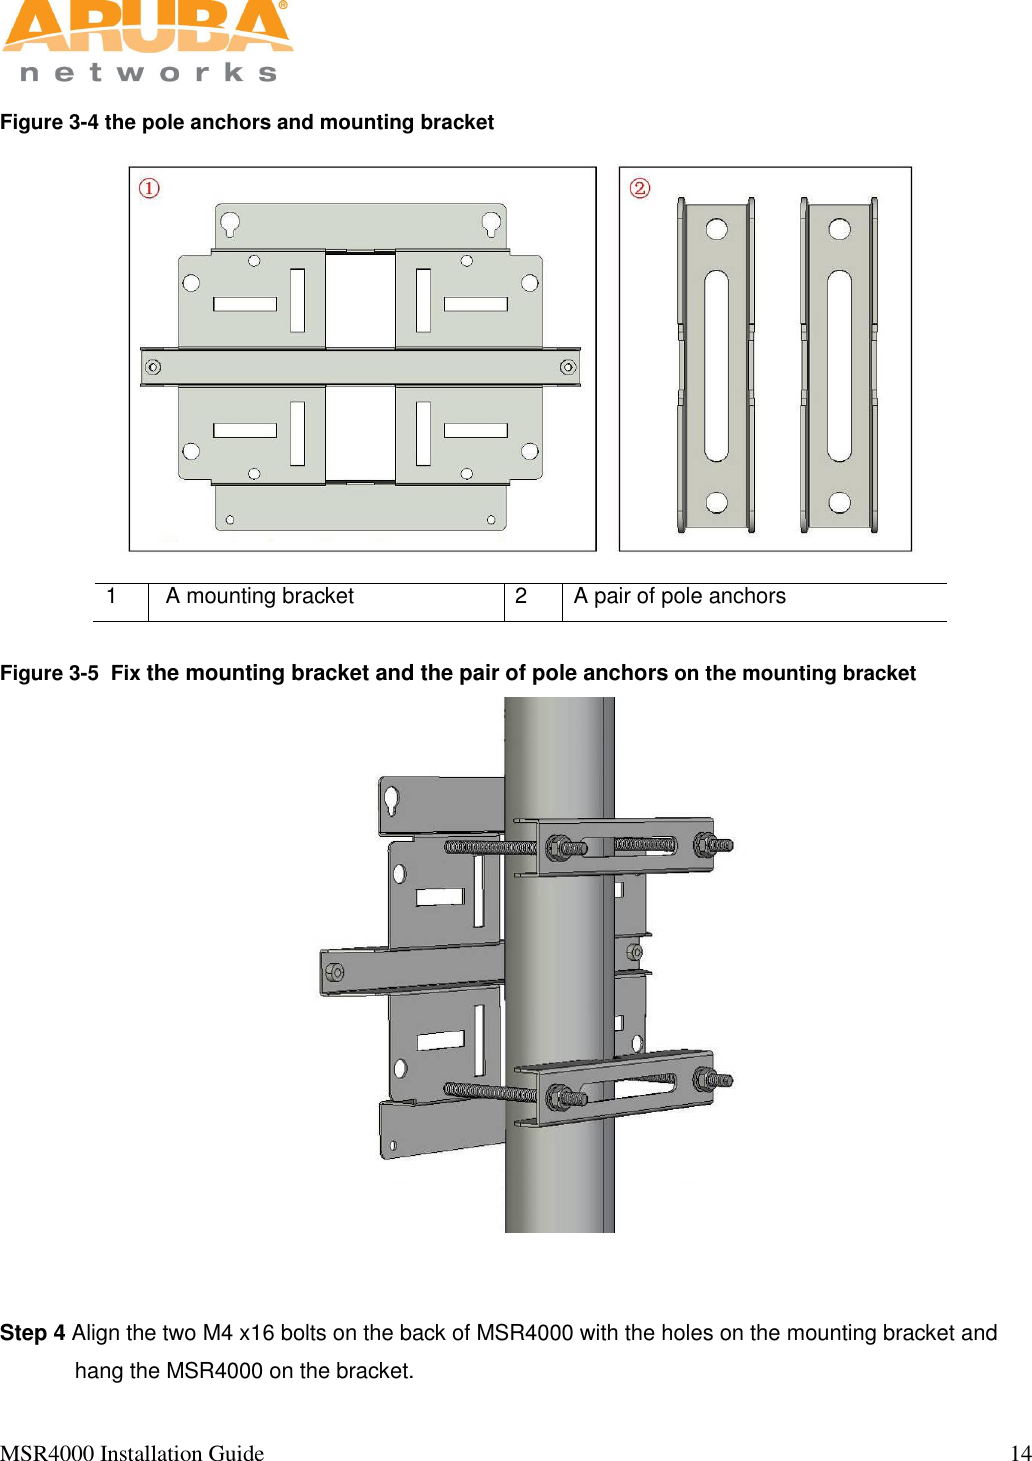   MSR4000 Installation Guide                                                                                                                                  14                                                                                                                       Figure 3-4 the pole anchors and mounting bracket  1  A mounting bracket 2 A pair of pole anchors  Figure 3-5  Fix the mounting bracket and the pair of pole anchors on the mounting bracket         Step 4 Align the two M4 x16 bolts on the back of MSR4000 with the holes on the mounting bracket and hang the MSR4000 on the bracket. 